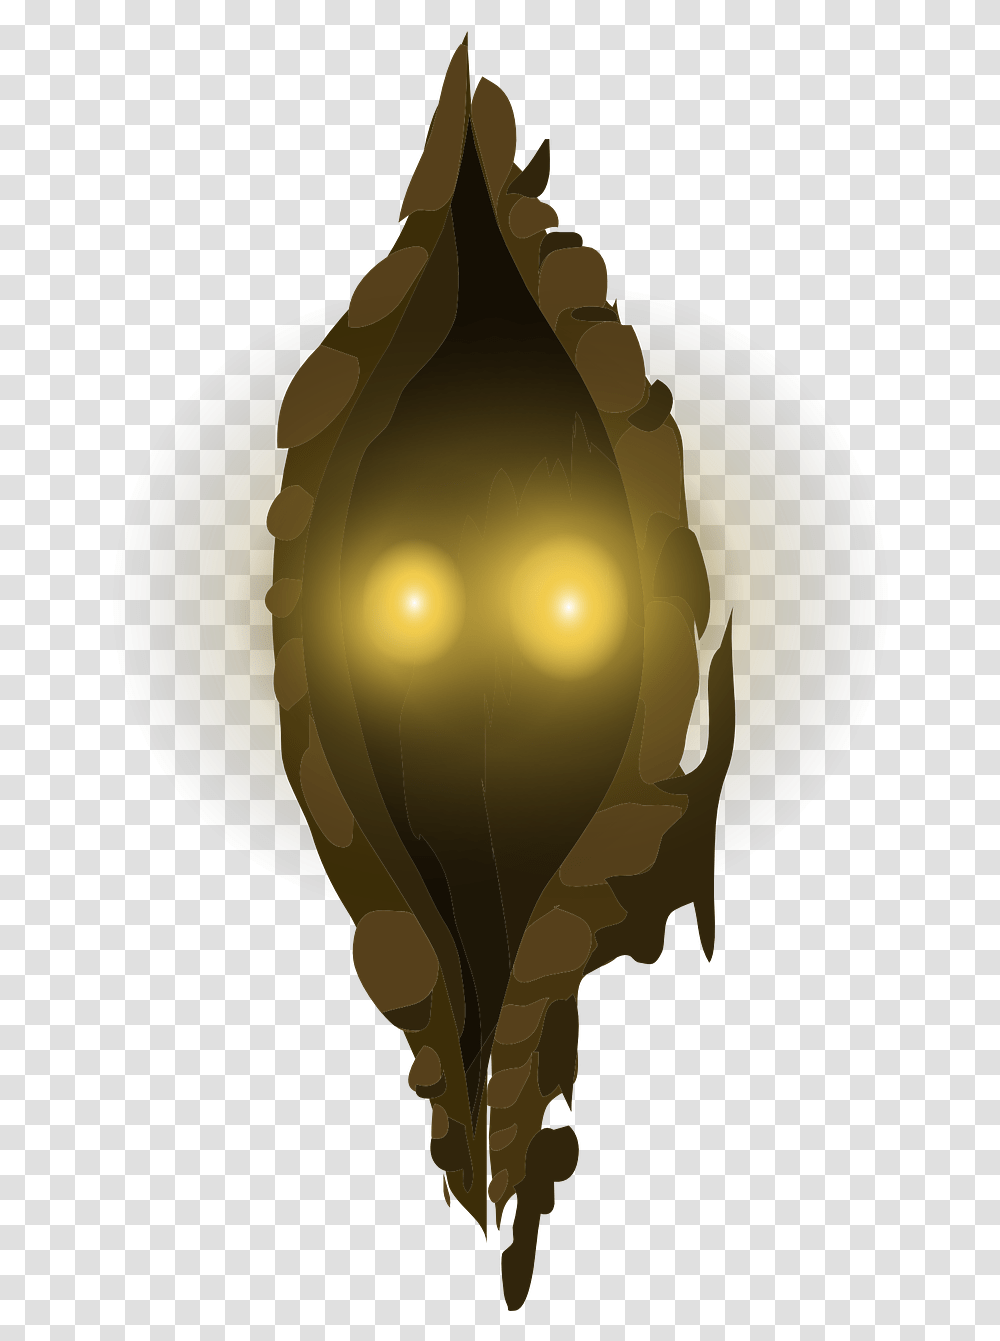 Eyes Yellow Glowing Mysterious Opening Monster Glowing Monster Eyes, Lamp, Light, Ball, Balloon Transparent Png